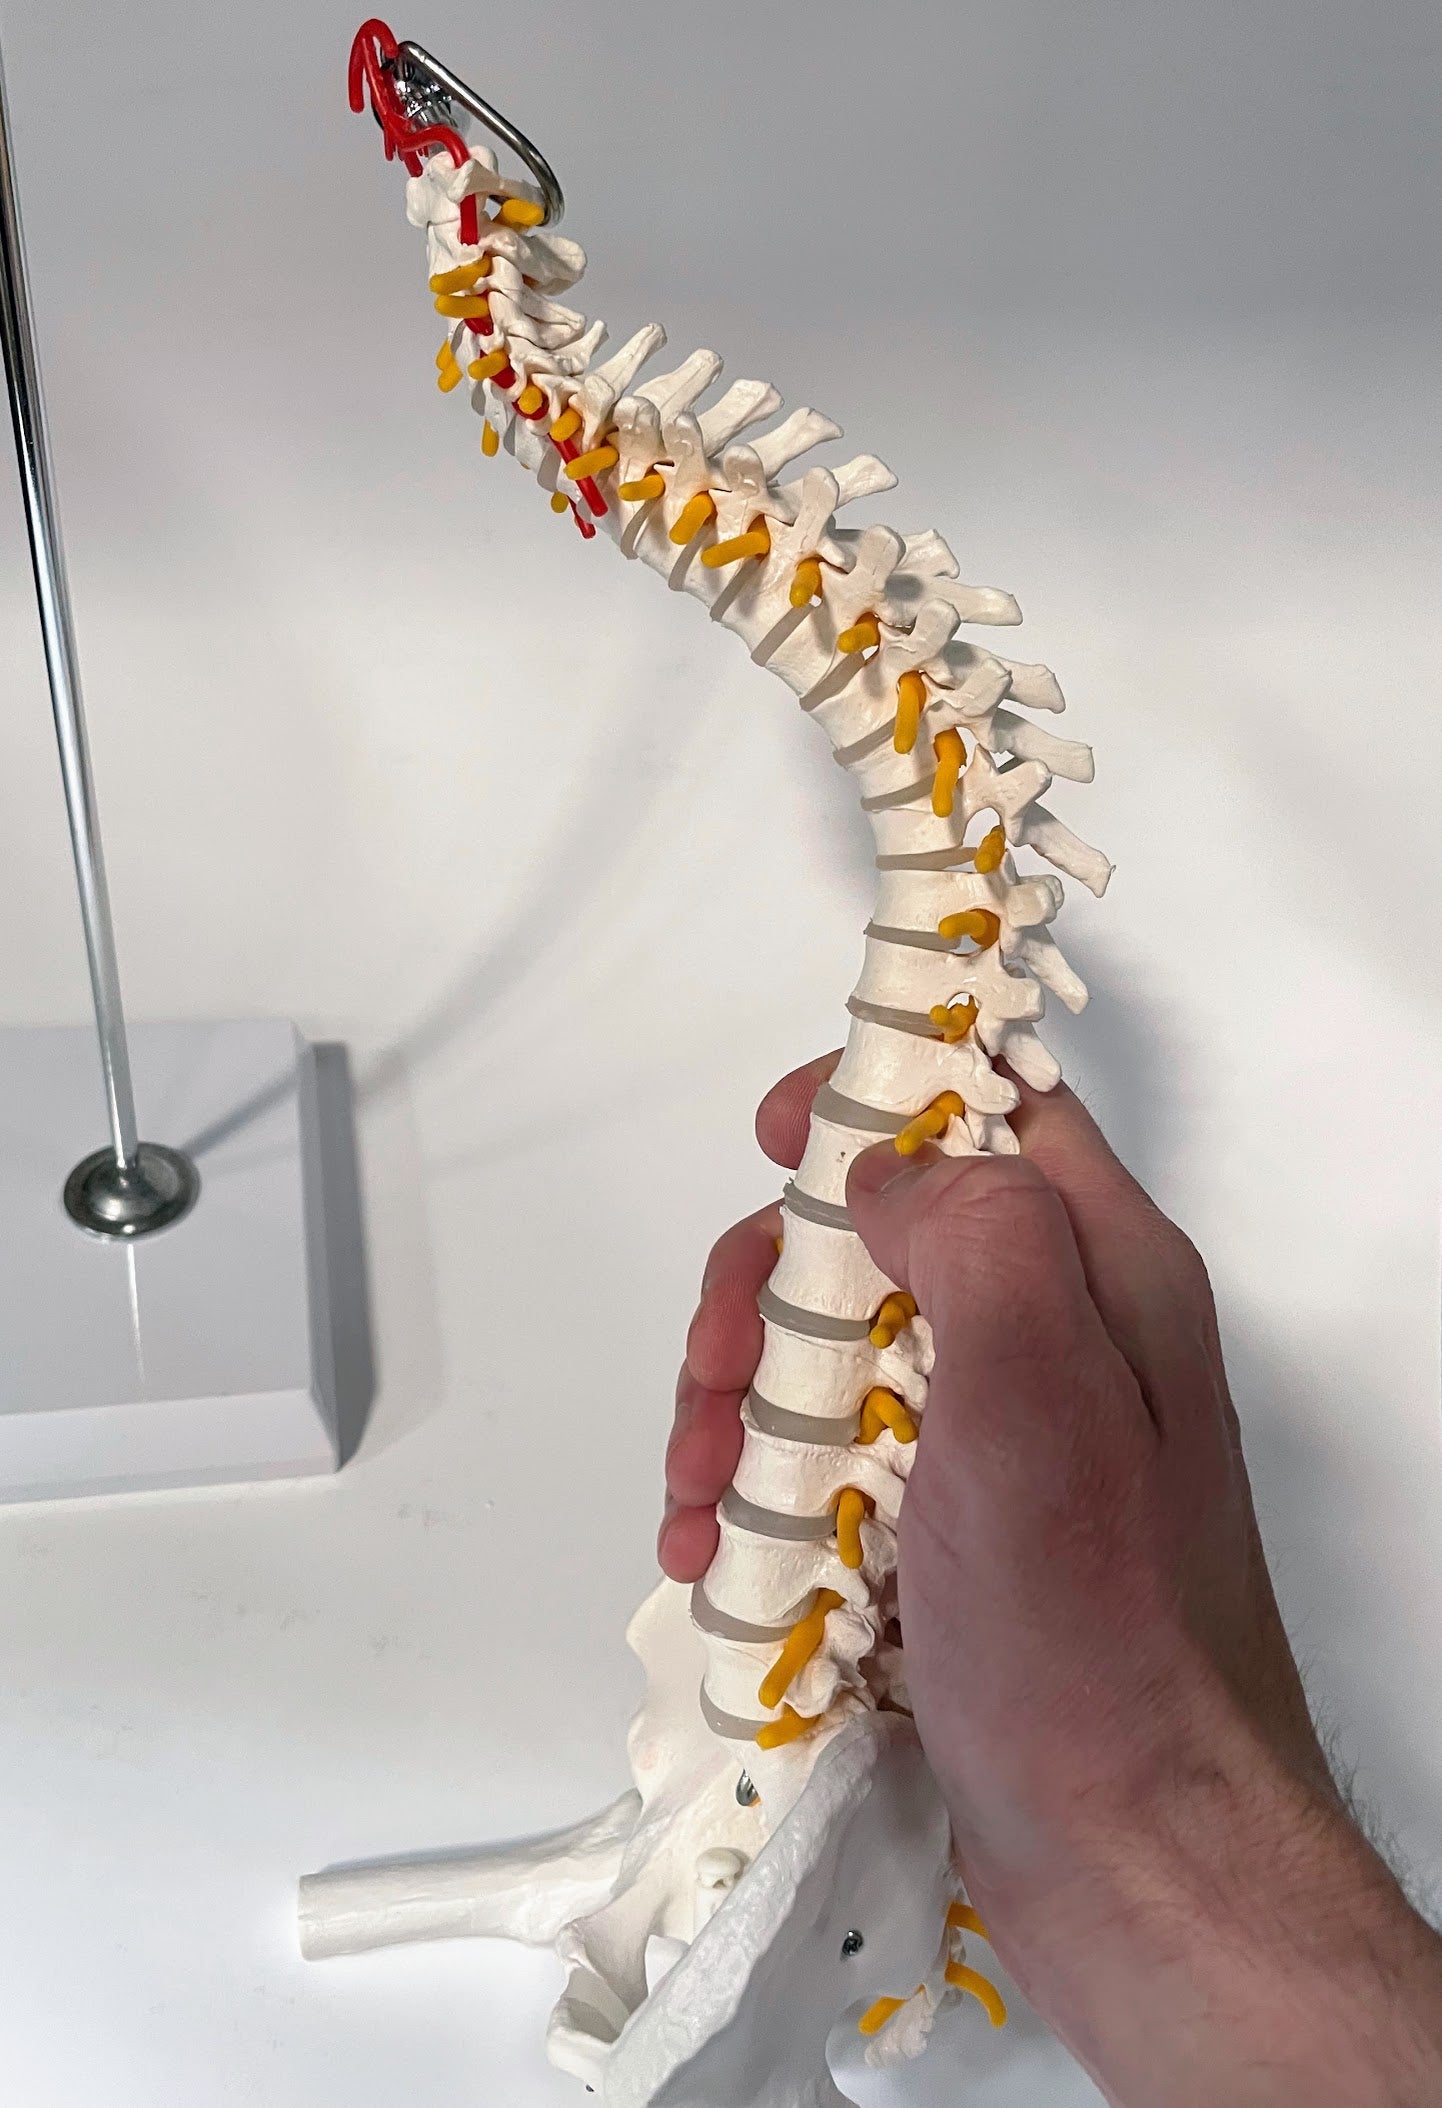 Scale model of the spine with nerves and other bones presented on stand